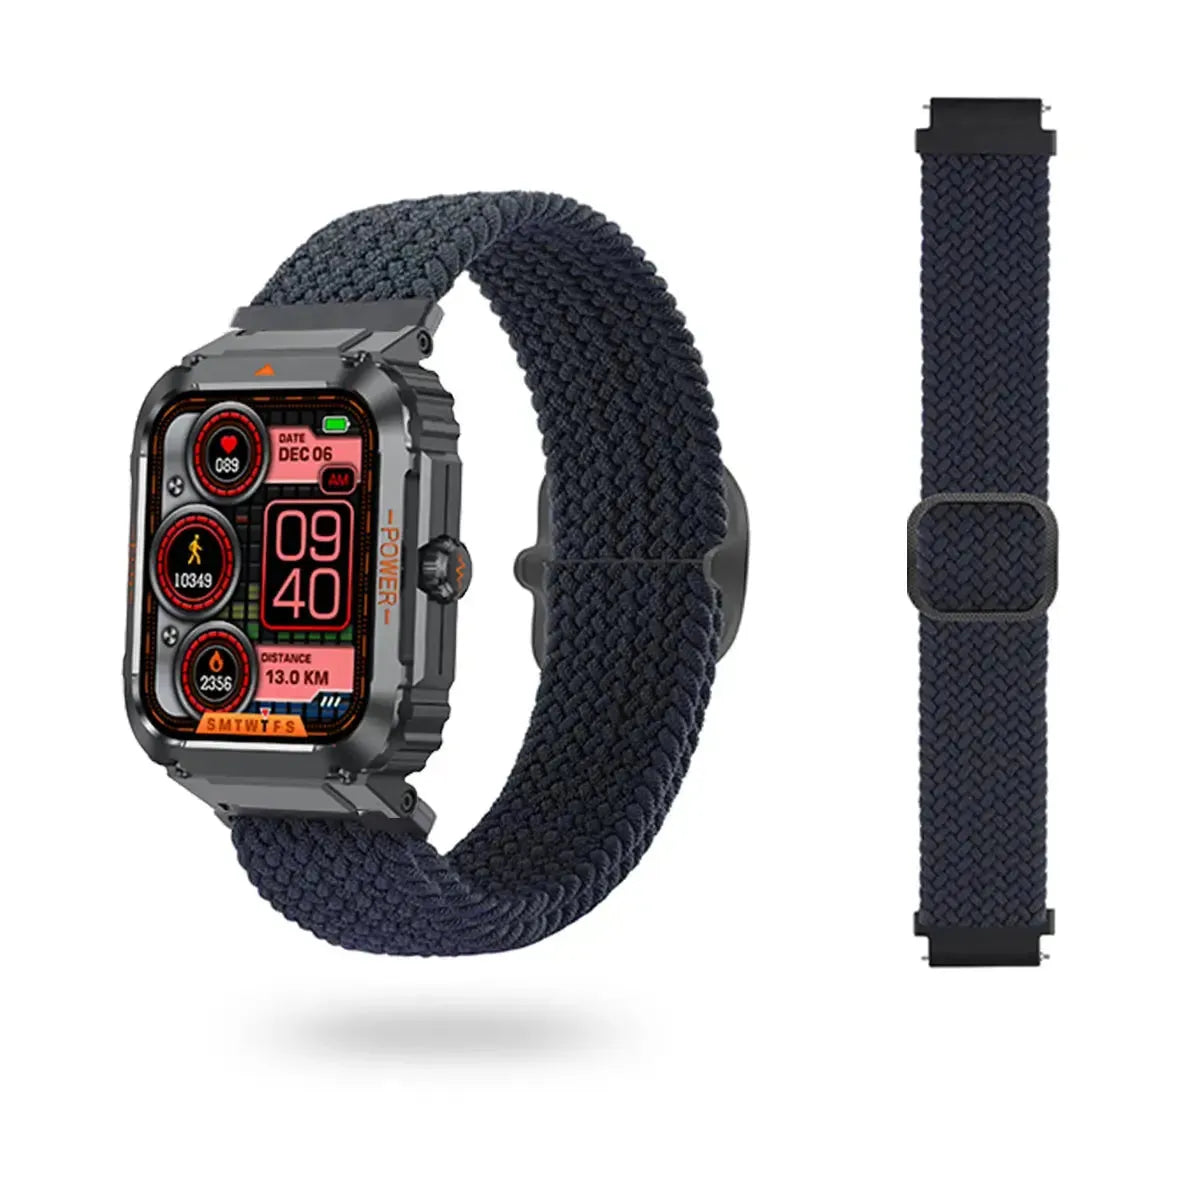 Tousains smartwatch S1 with navy woven band